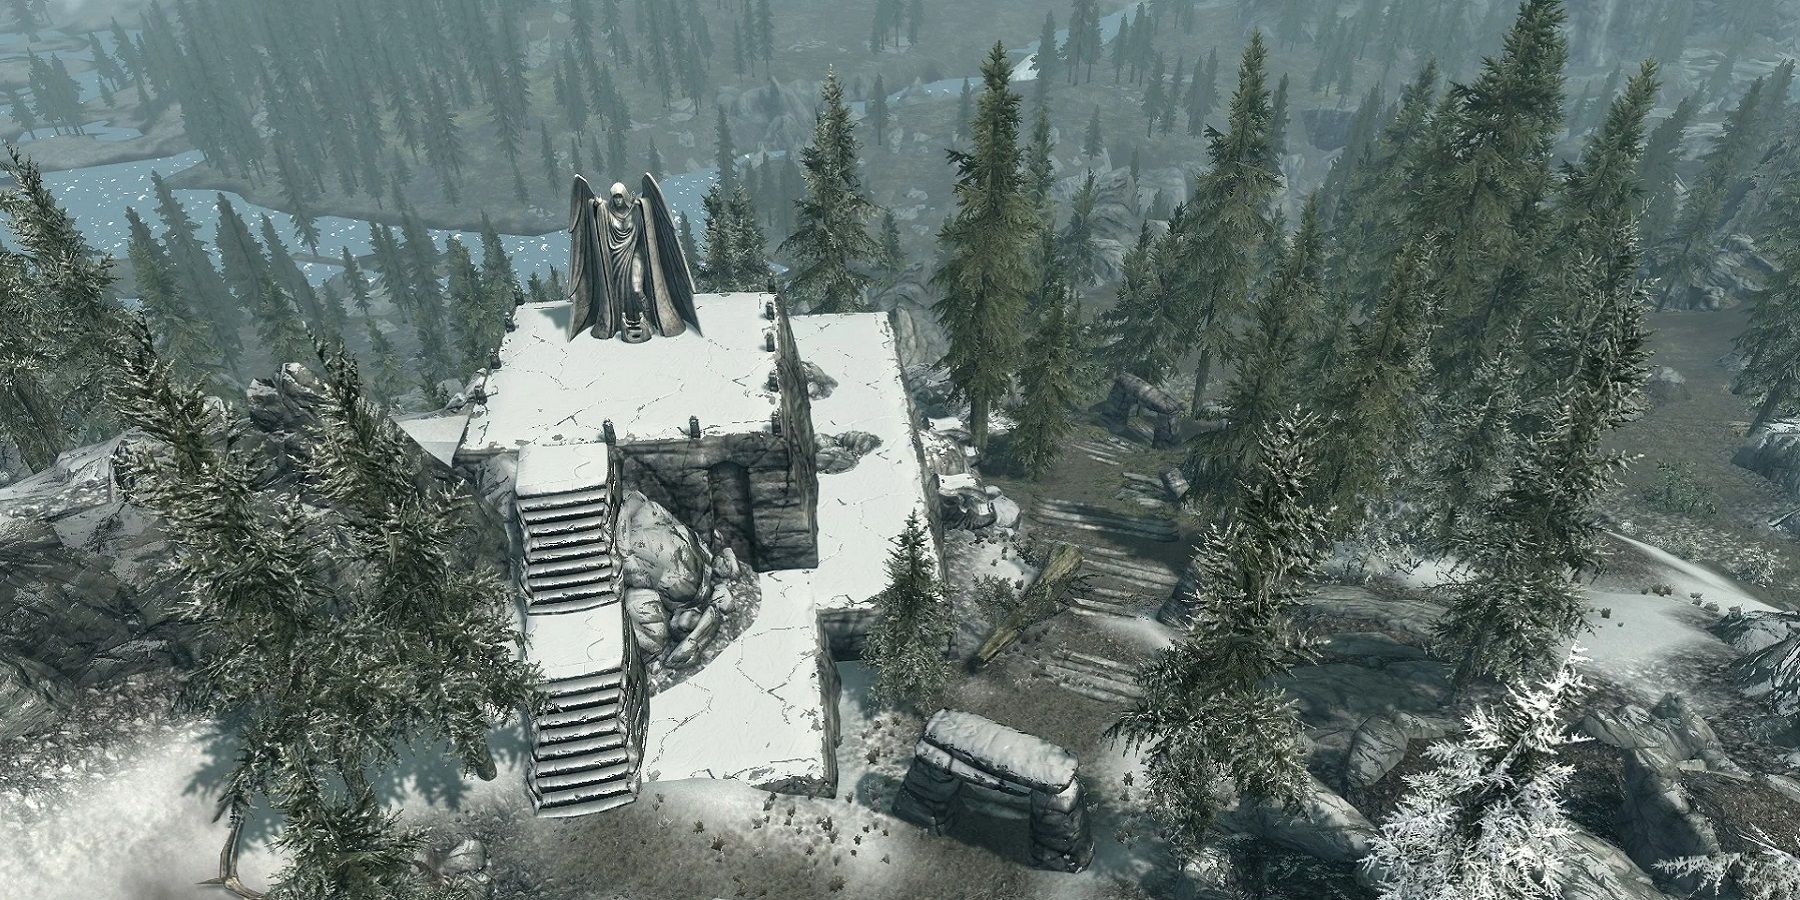 Image from Skyrim showing the statue of Meridia from high above.